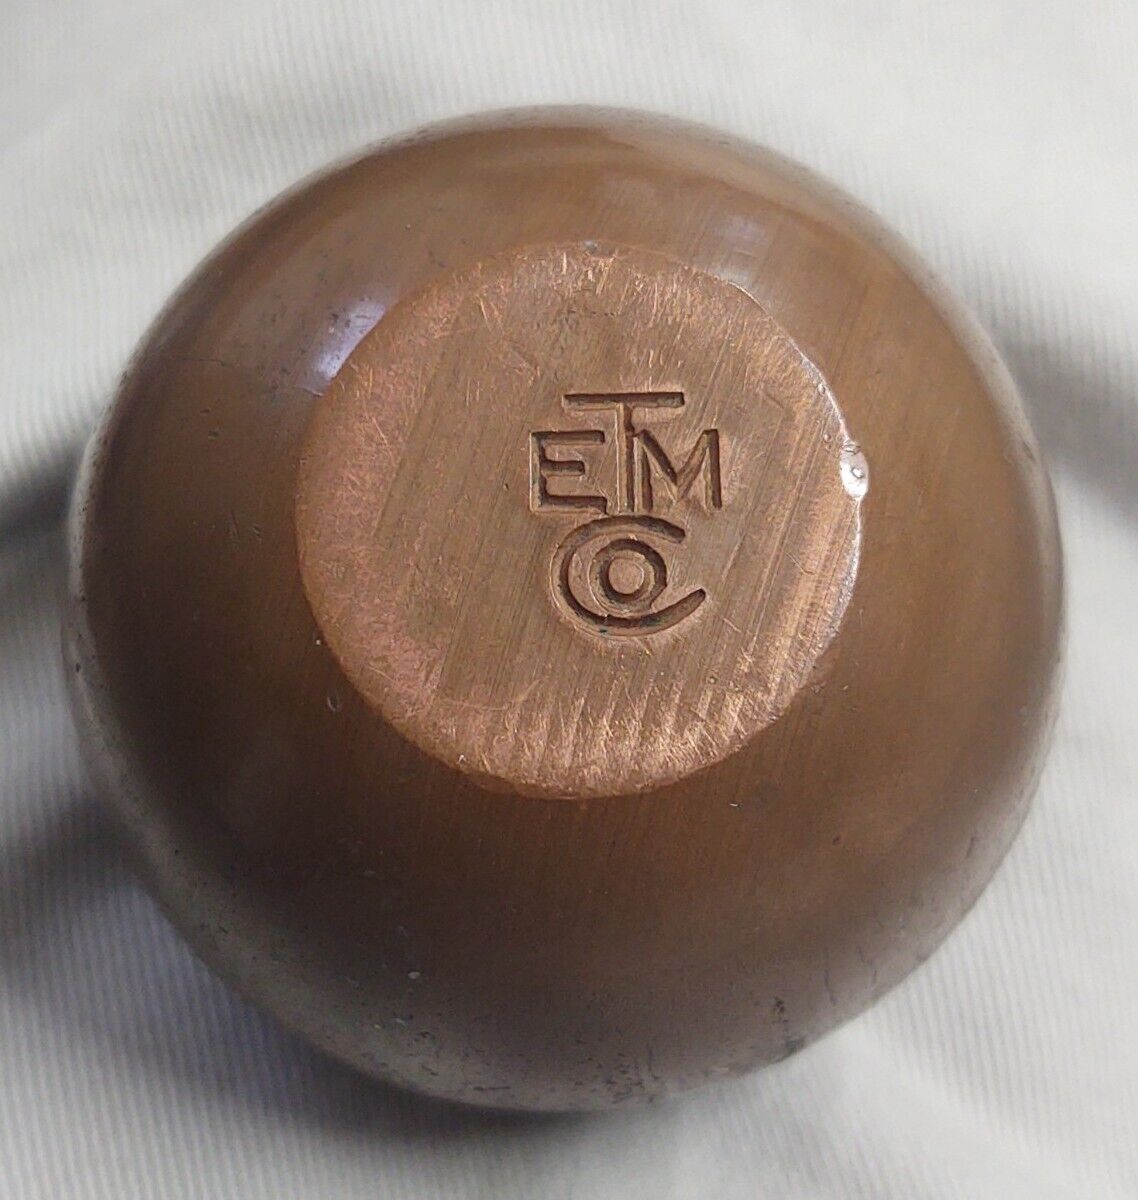 ETM Company Copper  Paperweight Ball HEAVY